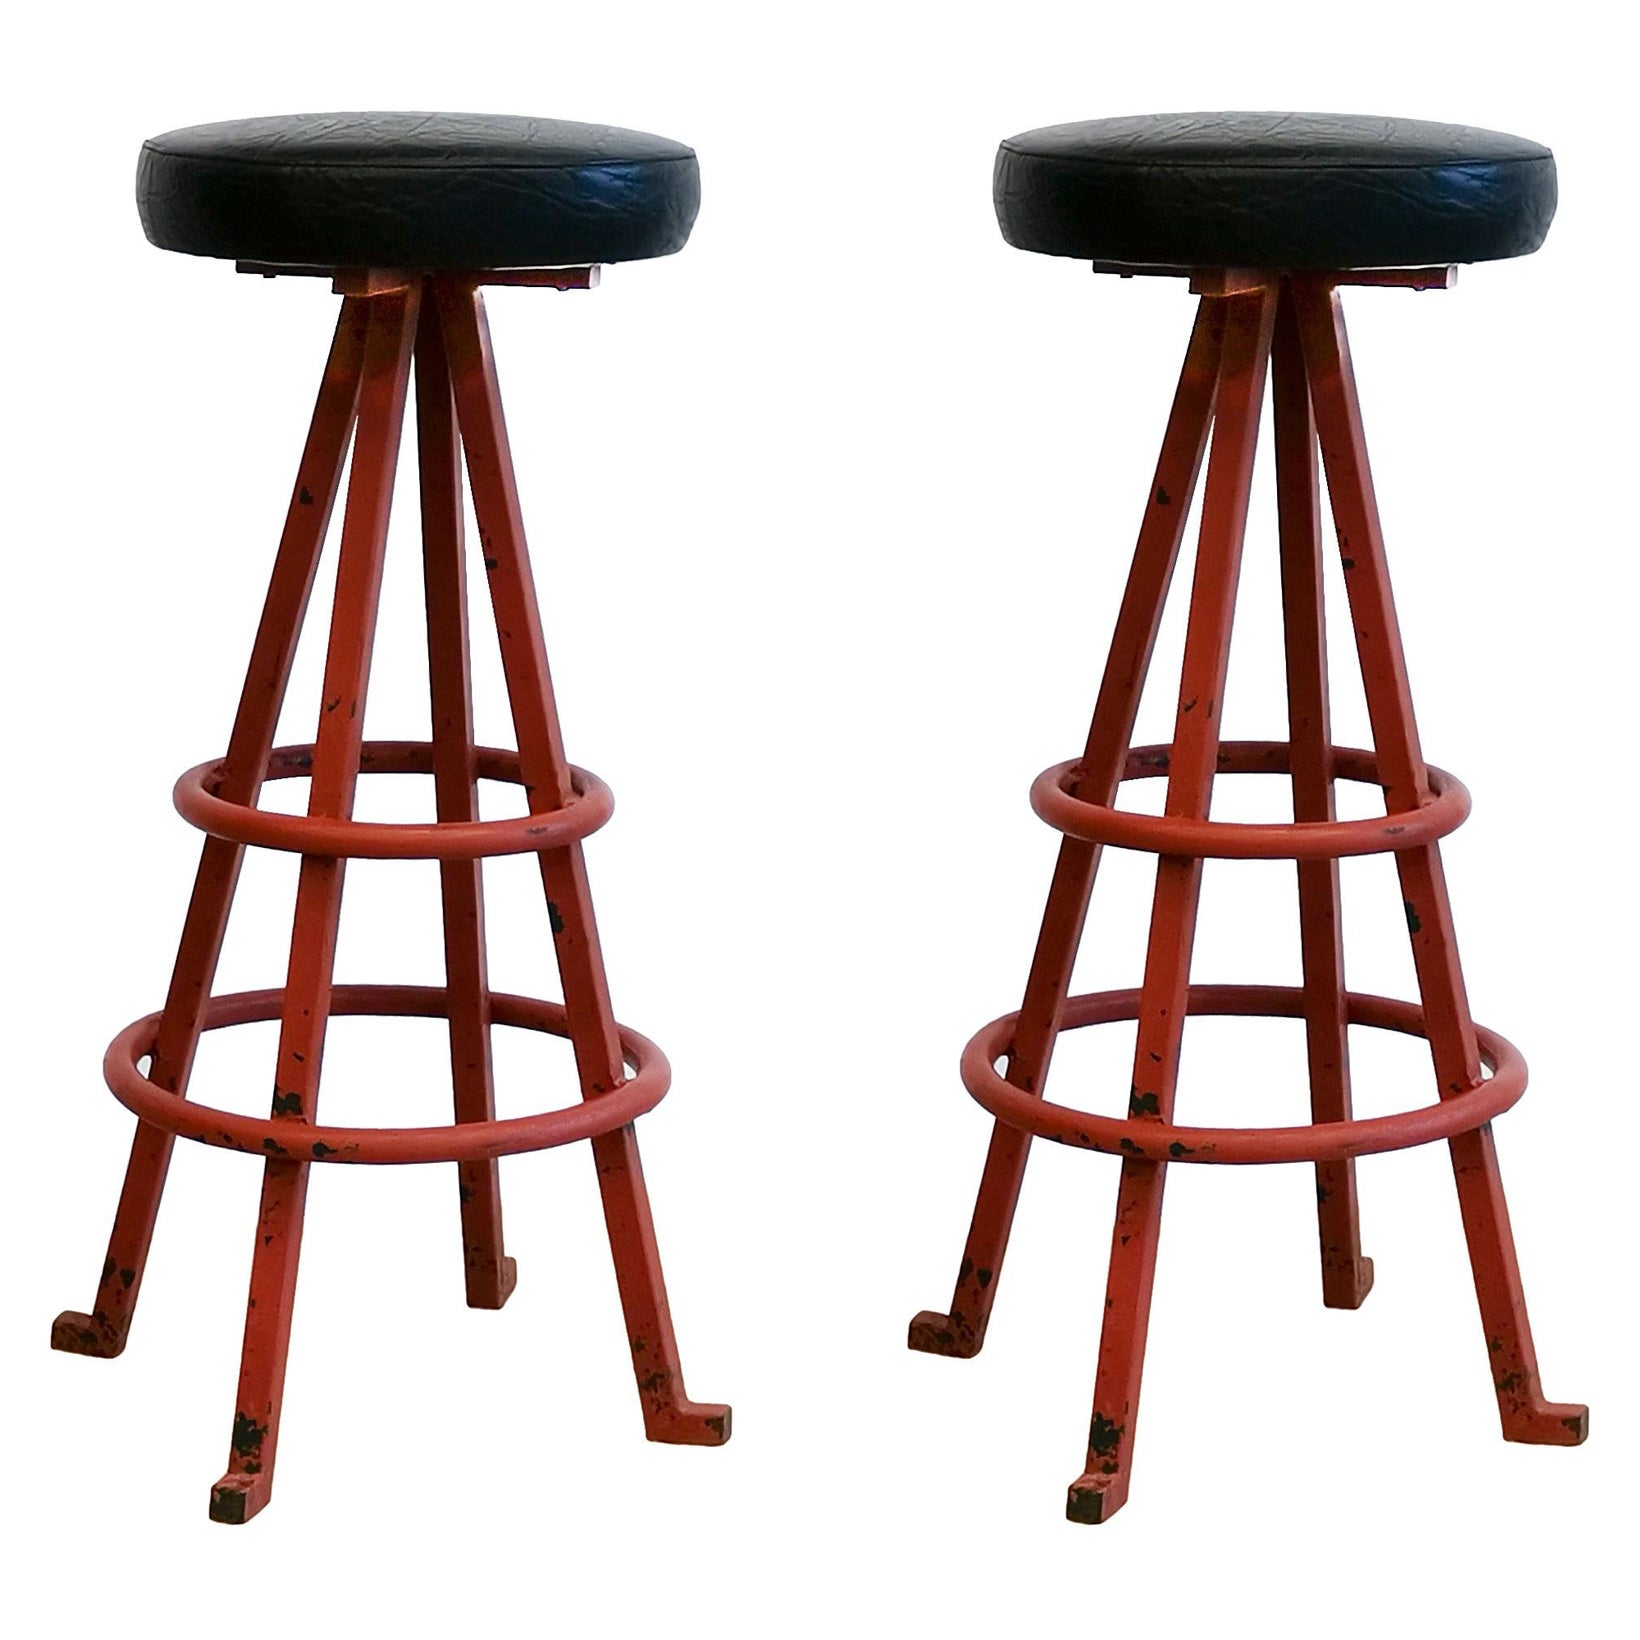 Pair Mid-Century Modern Stools in Steel and Faux Leather -Spain, Barcelona 1960s For Sale